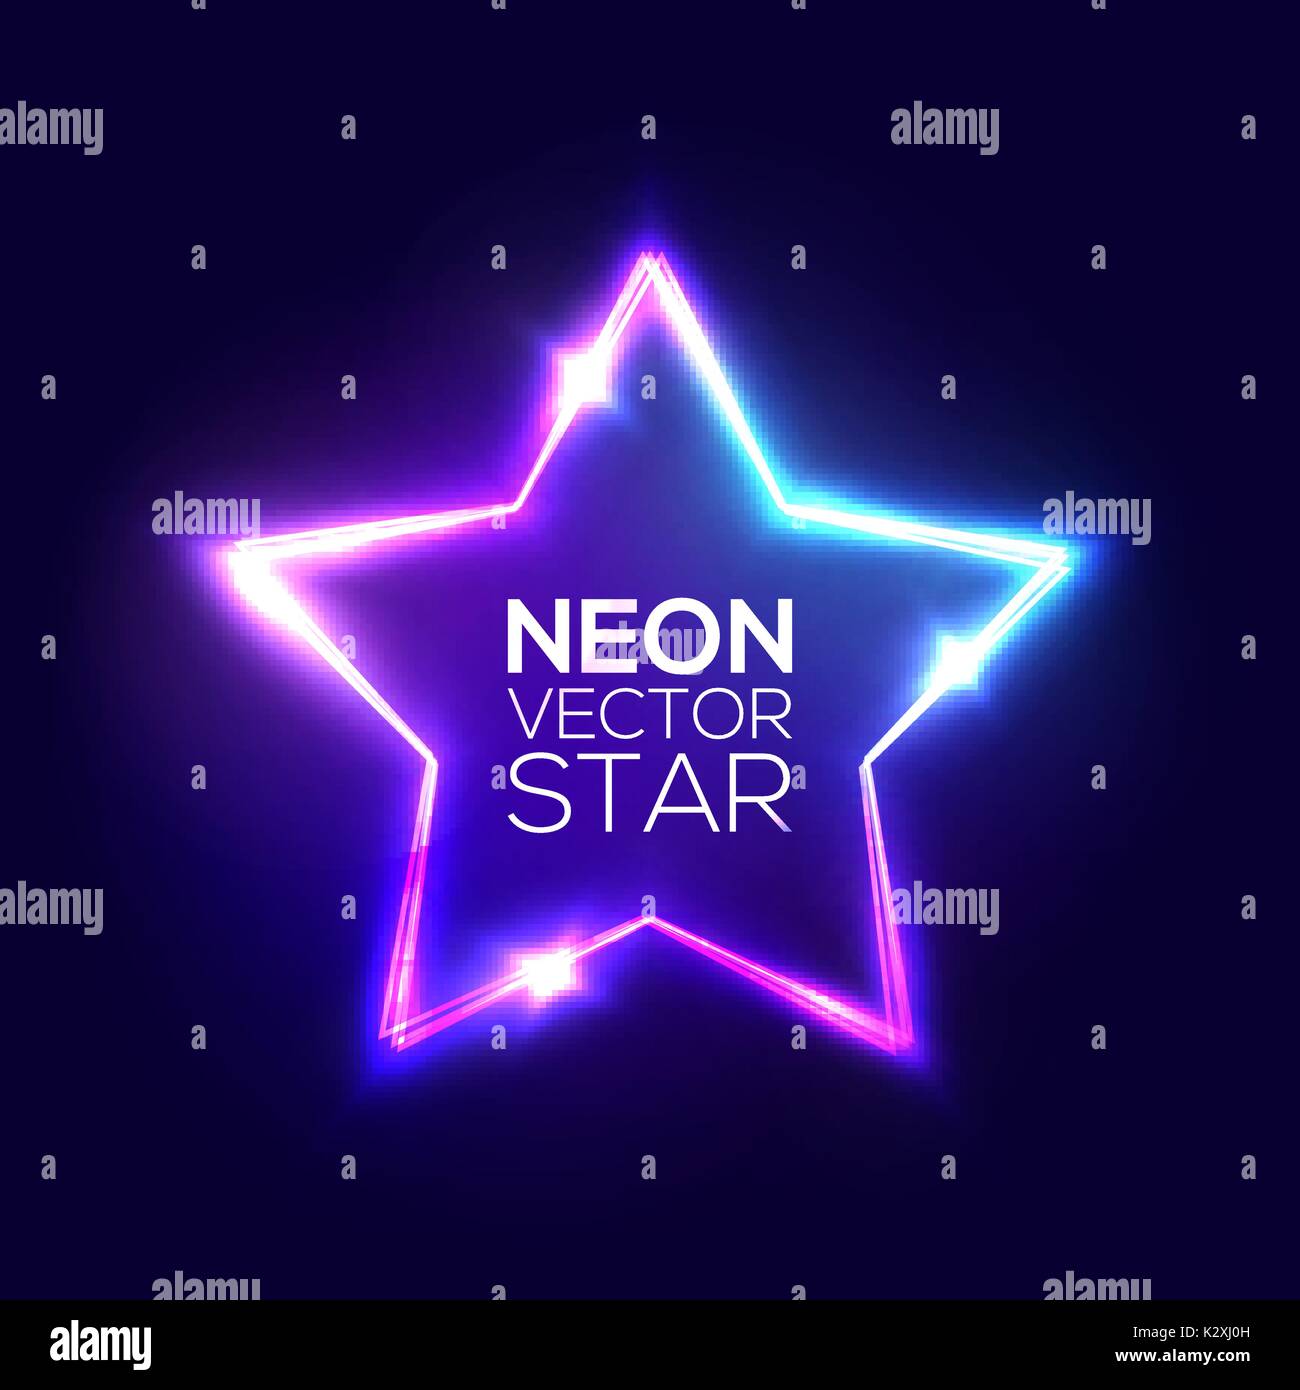 Abstract Neon Star. Electric Frame. Night Club Sign. 3d Retro Light Starry Signboard With Shining Neon Effect. Techno Glowing Frame On Dark Blue Backdrop. Colorful Vector Illustration in 80s Style. Stock Vector